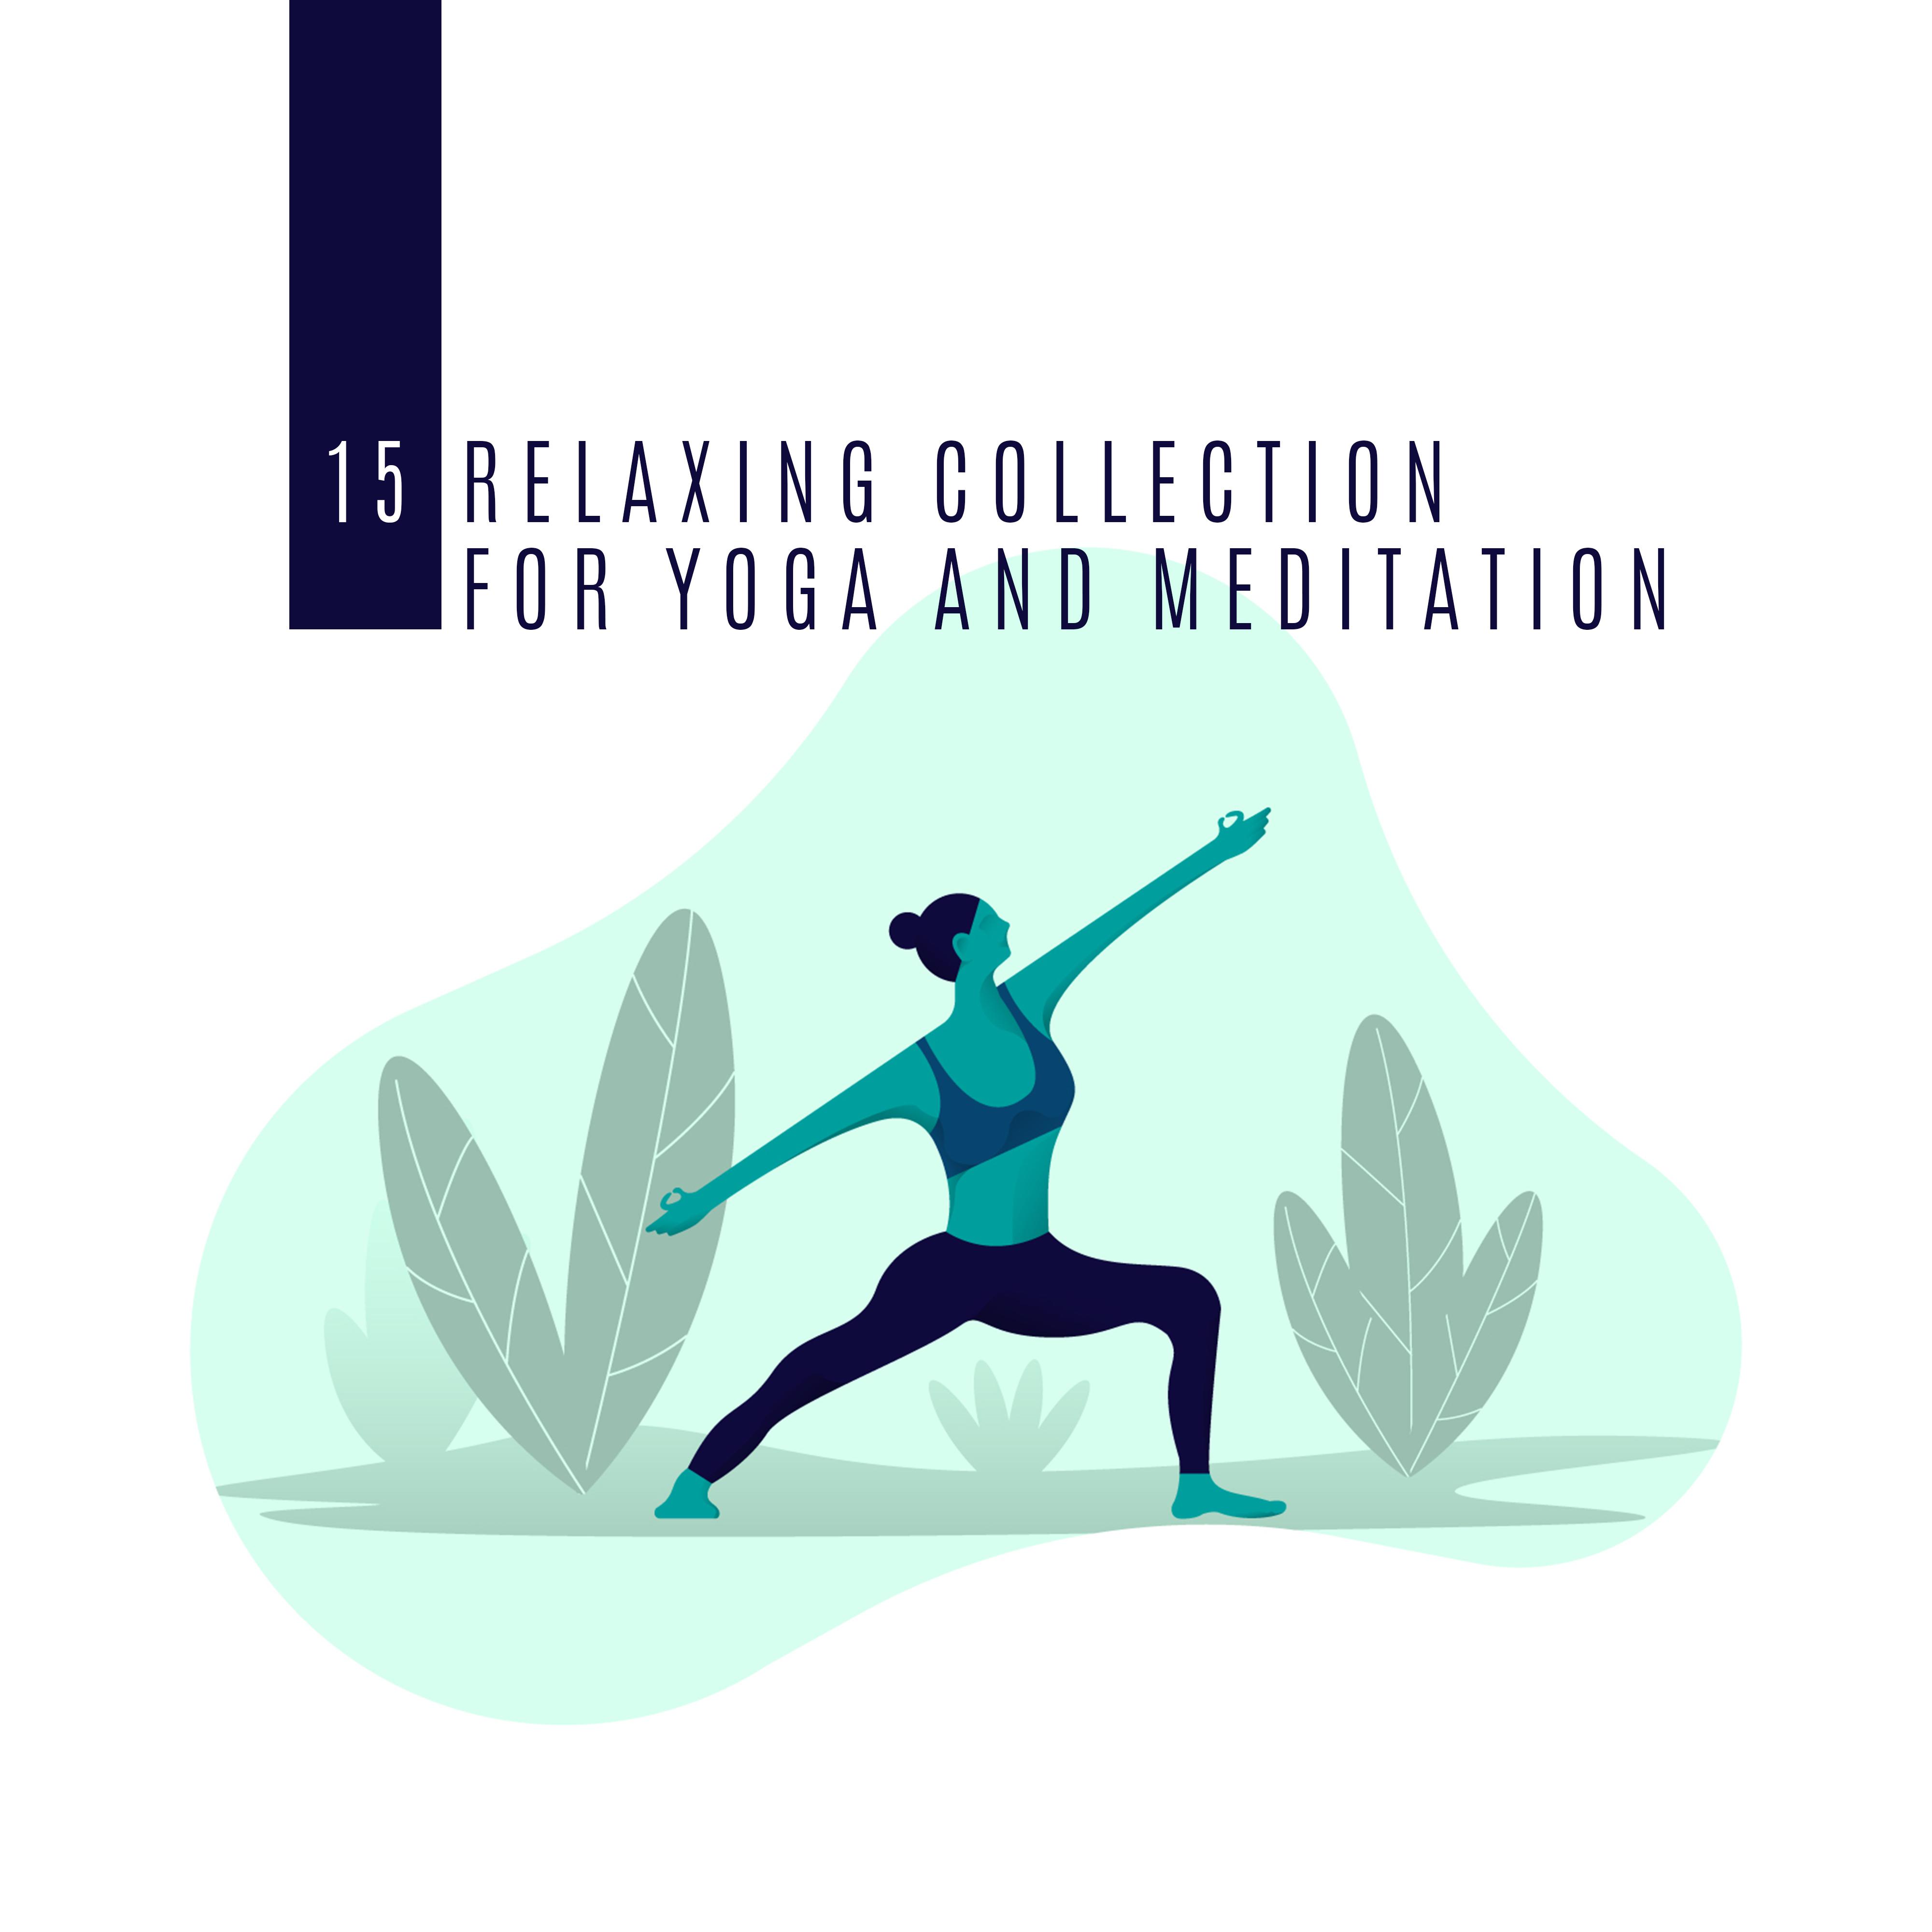 15 Relaxing Collection for Yoga and Meditation  Yoga Training, Meditation Music Zone, Zen Yoga, Pure Mind, Yoga Relaxing Music, Zen, Inner Balance